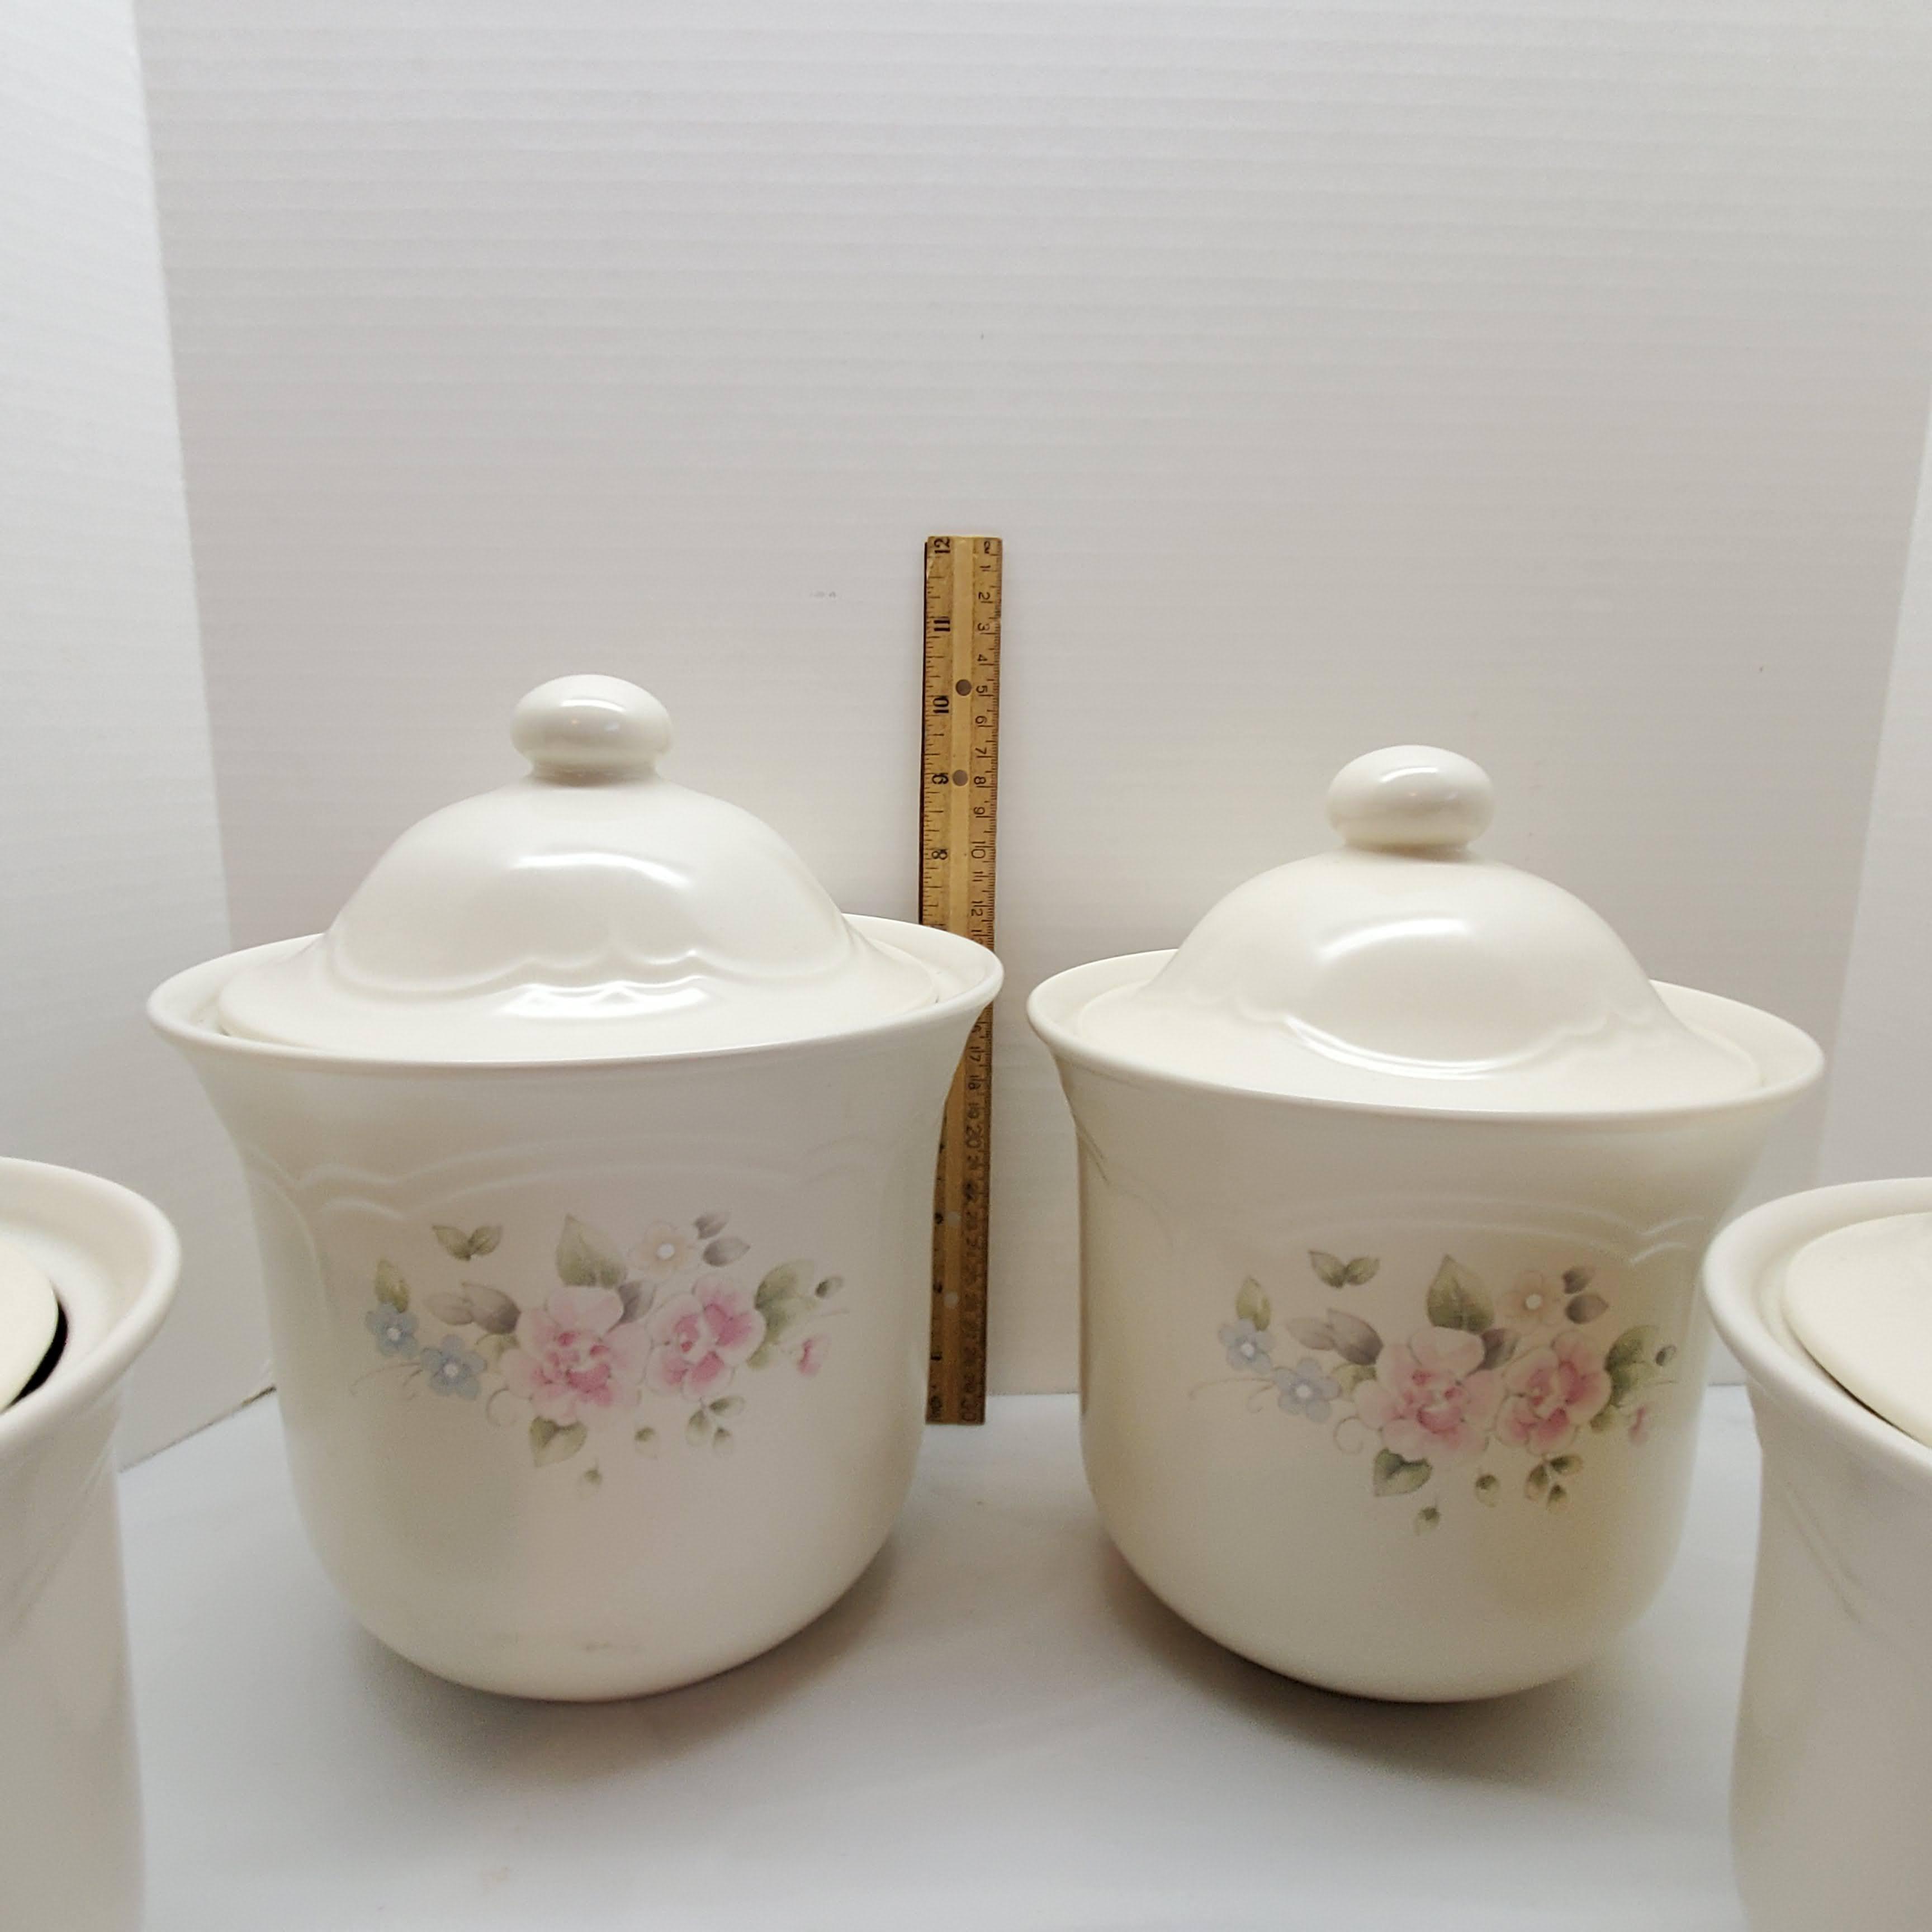 Vintage Pfaltzgraff Ceramic Canister Set, Tea Rose Pattern, Excellent Condition, Made in USA